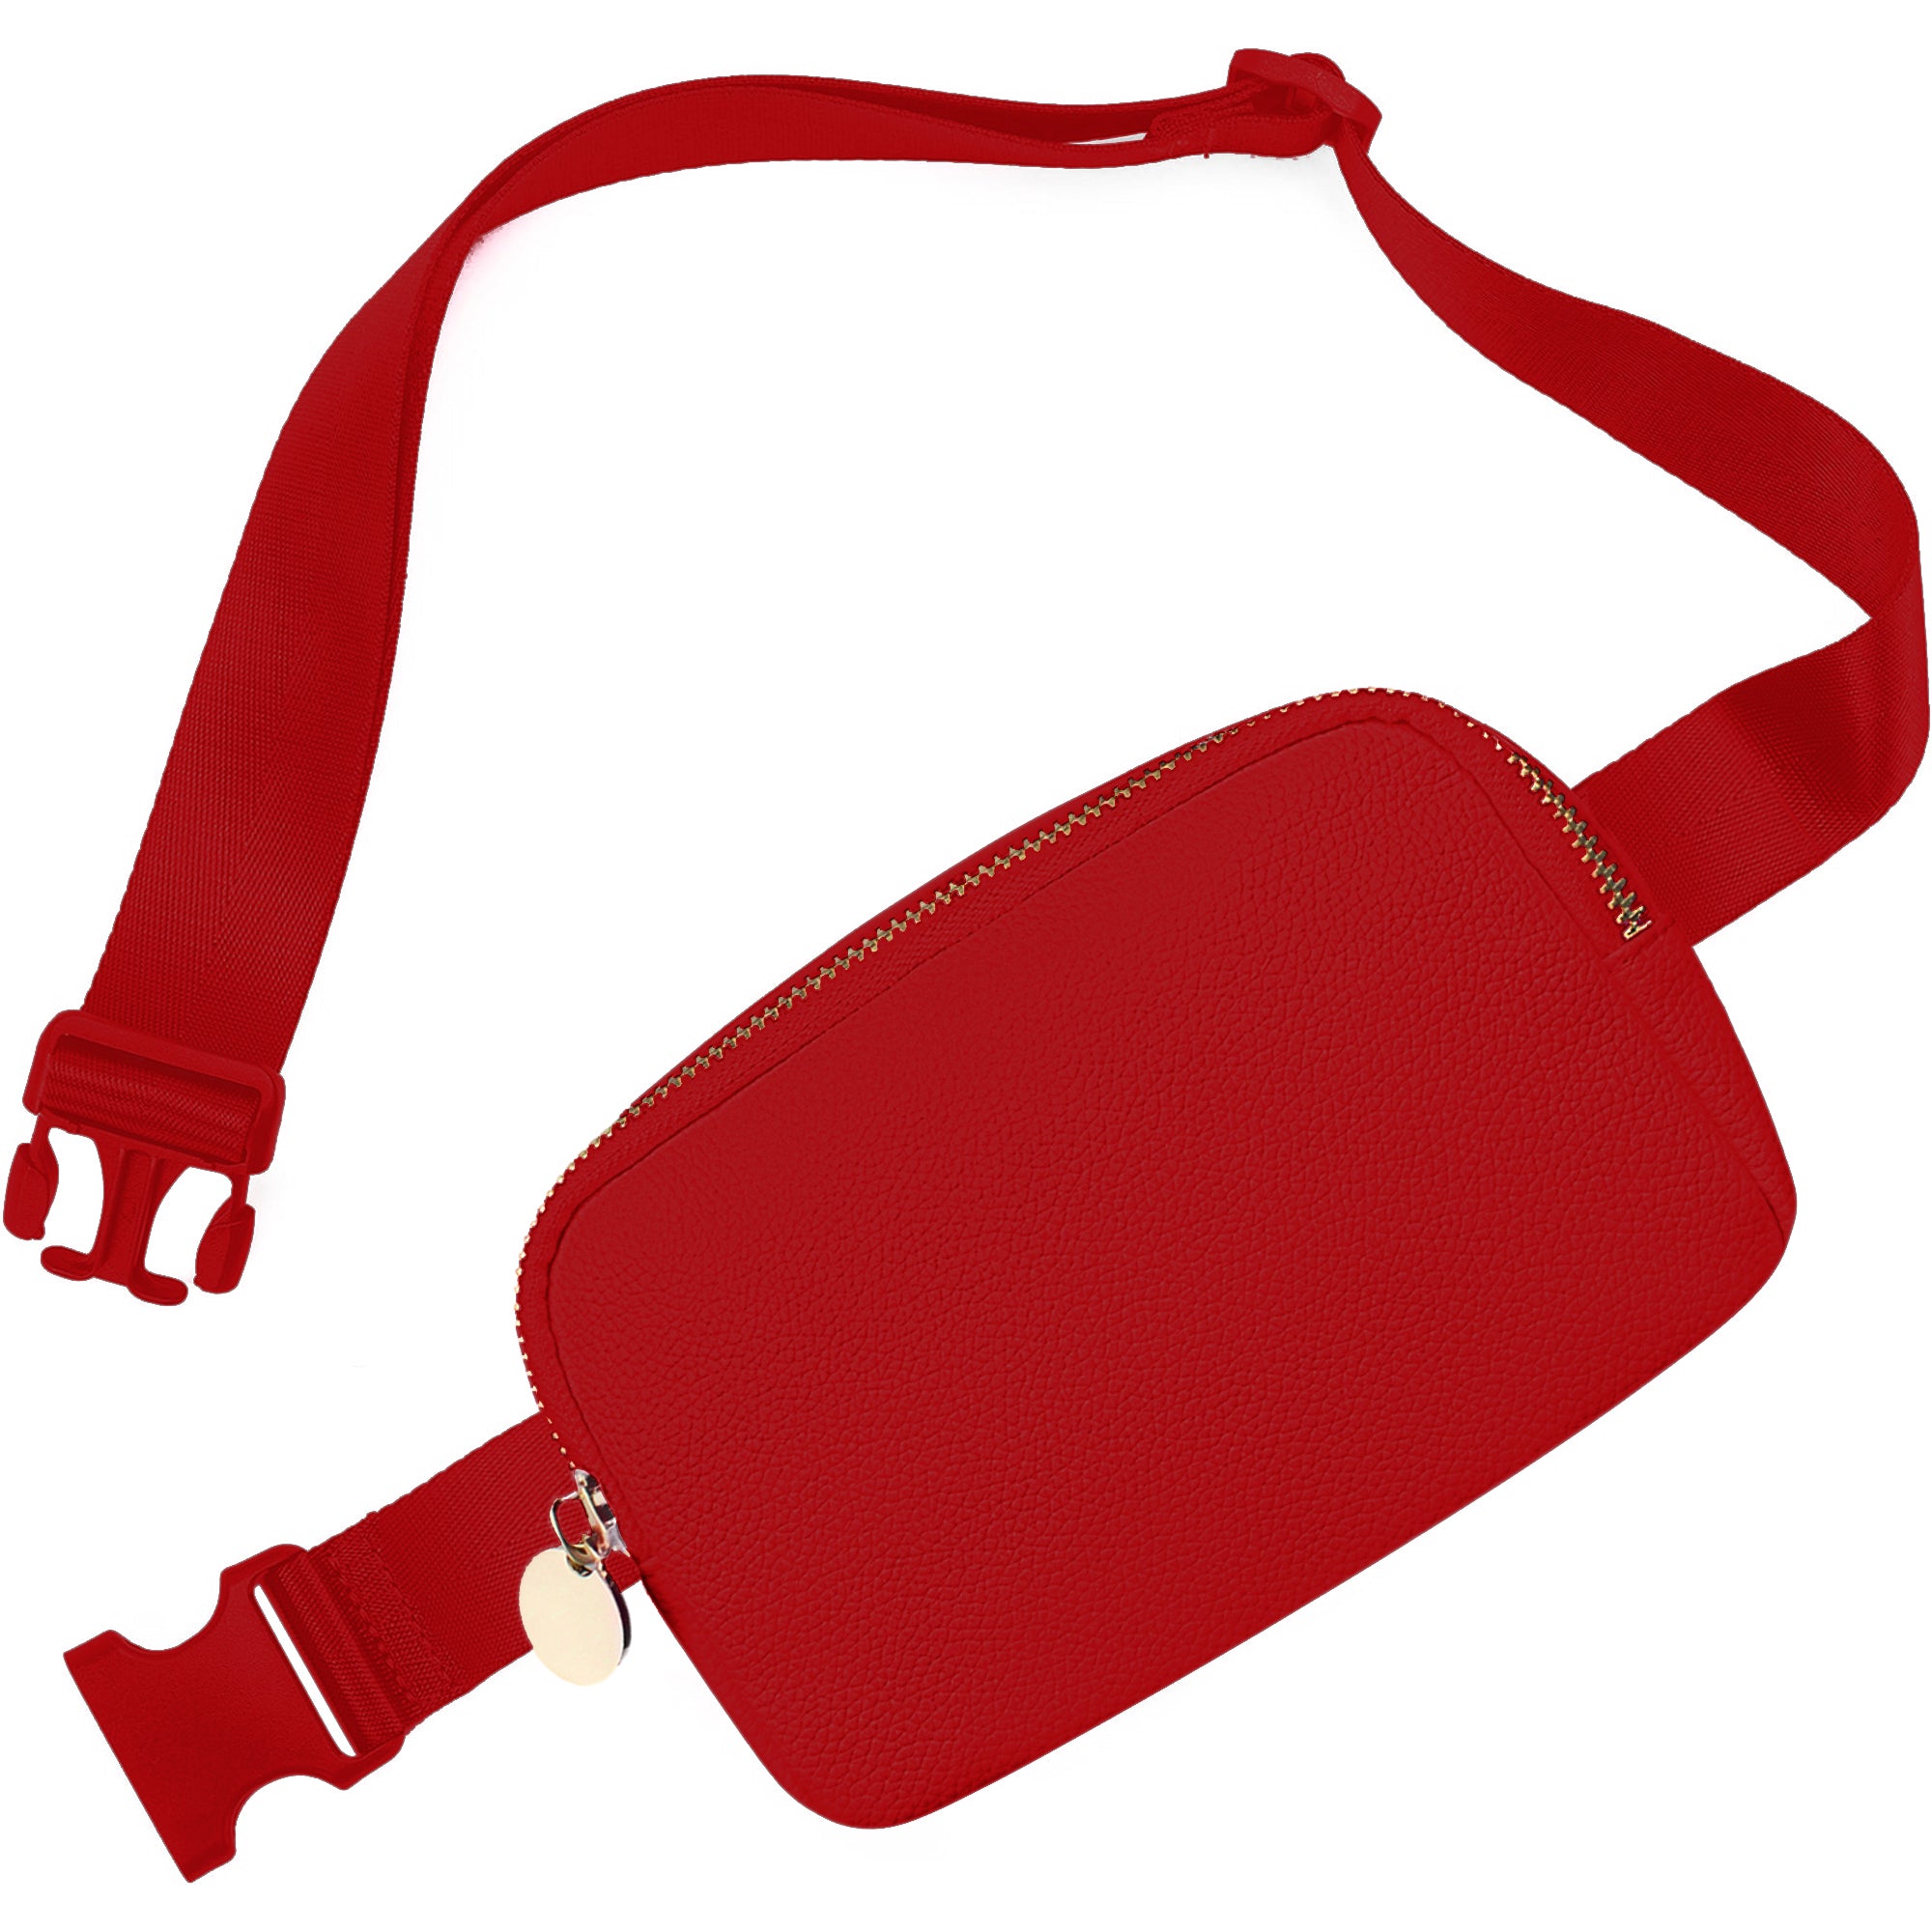 red fanny pack for women leather belt bag for girls fanny pack crossbody bags for women belts bag for women bum bags stylish fanny packs for women beltbag fashion fanny packs for women crossbody fanny bags for women fanny crossbody bags for women belt bag for girls fanny pack for girls teens